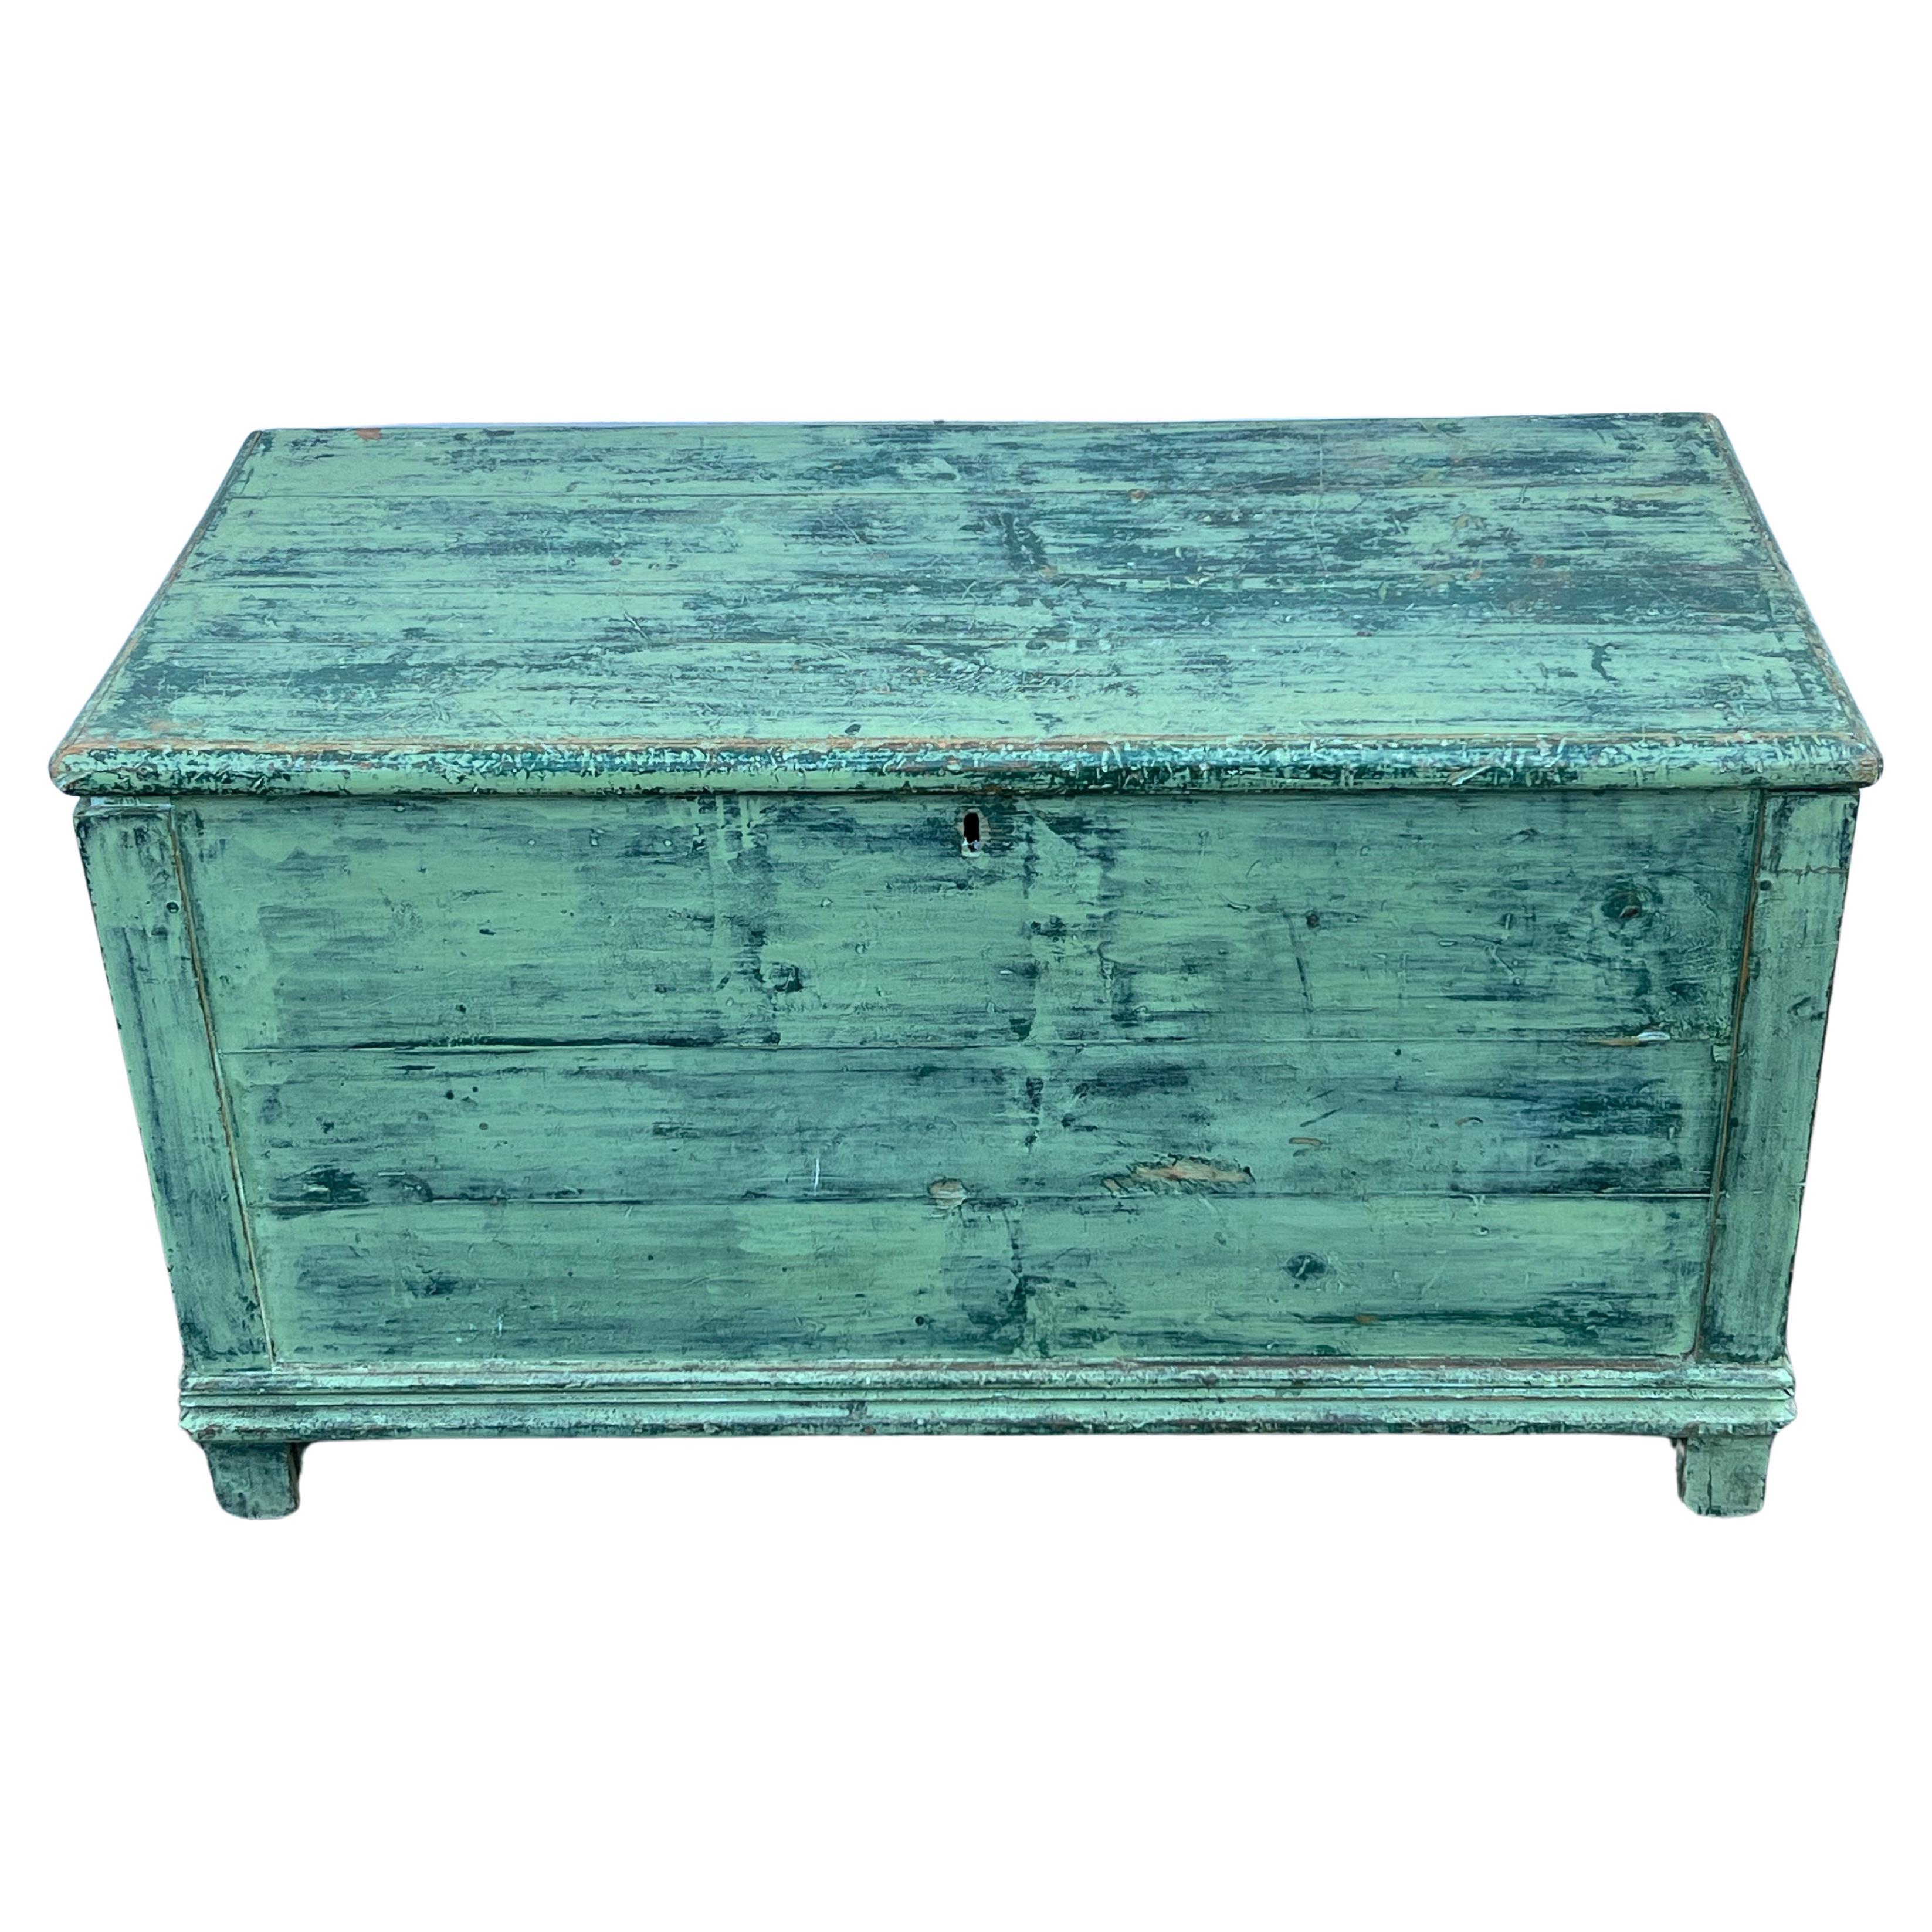 19th Century Pine Blanket Chest in Early Green Paint For Sale